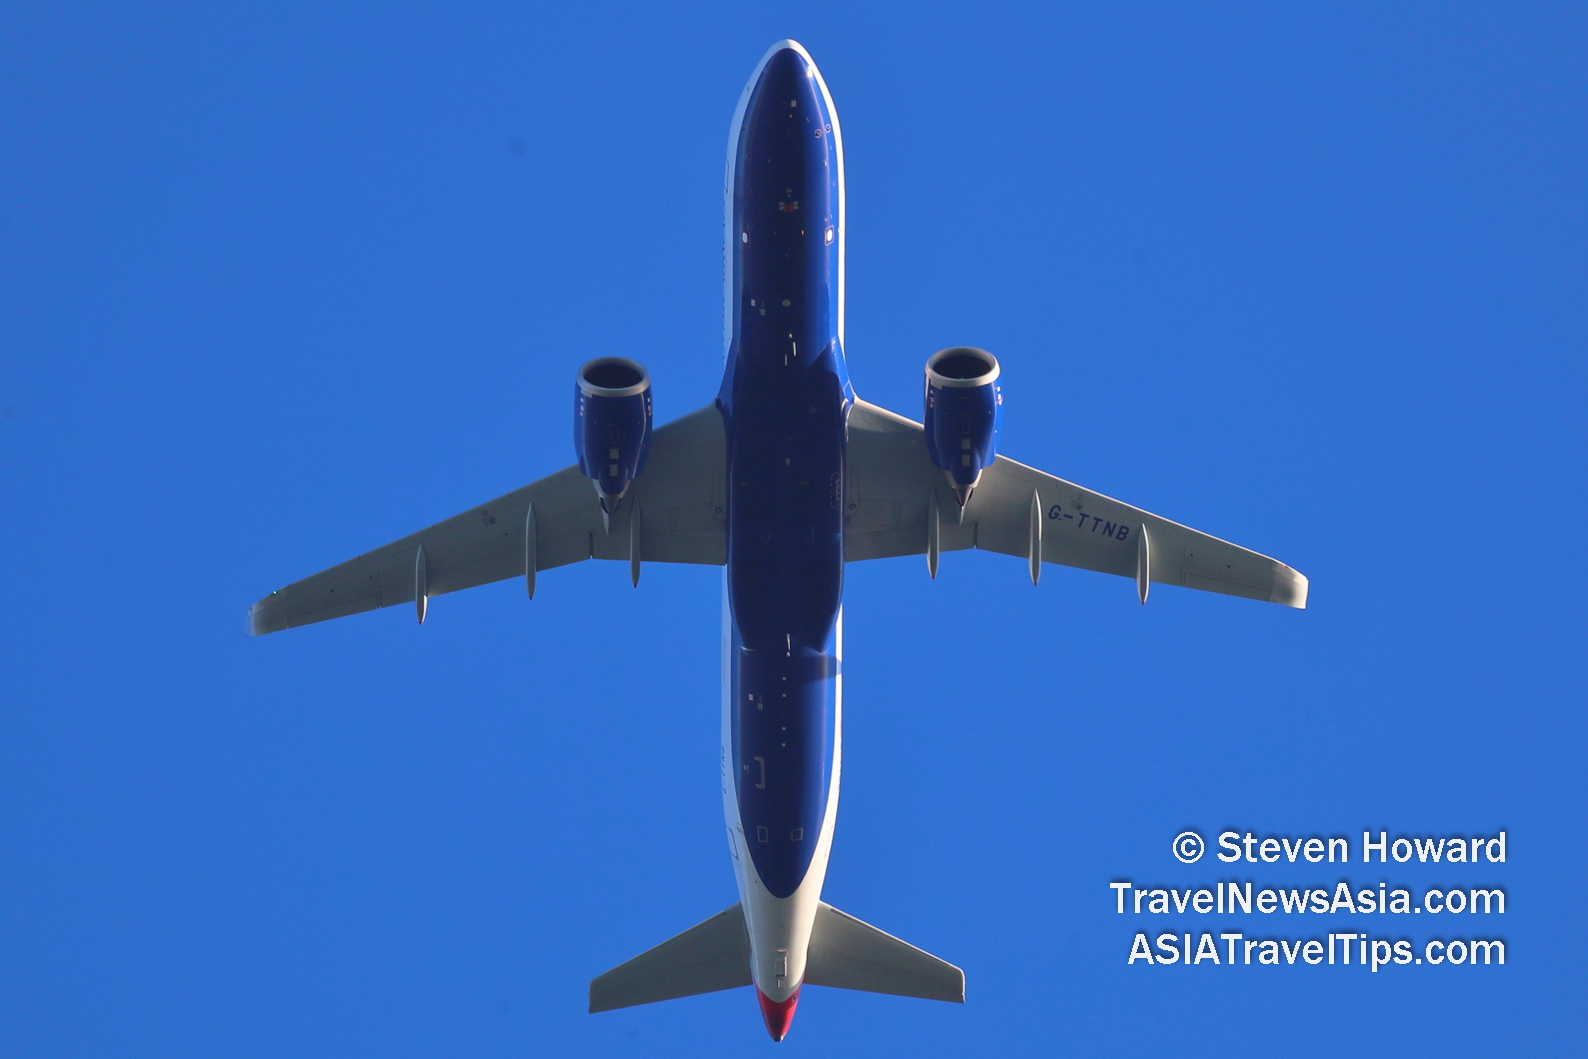 British Airways A320 reg: G-TTNB. Picture by Steven Howard of TravelNewsAsia.com Click to enlarge.